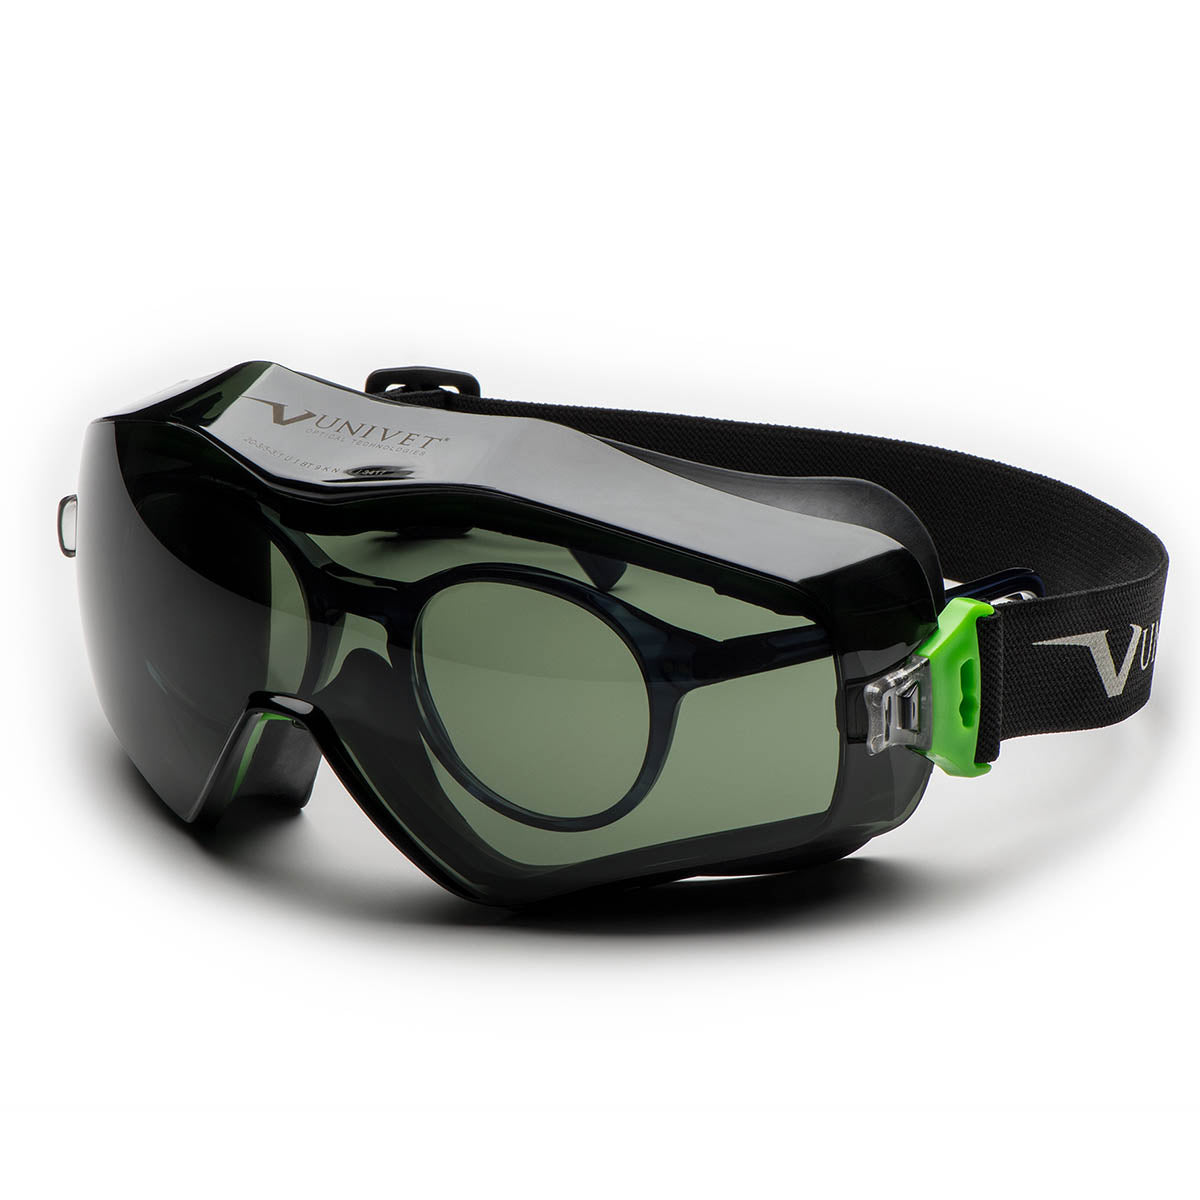 Univet 6X3 Ventilated Solar G15 Safety Goggles - 6X3.00.00.05